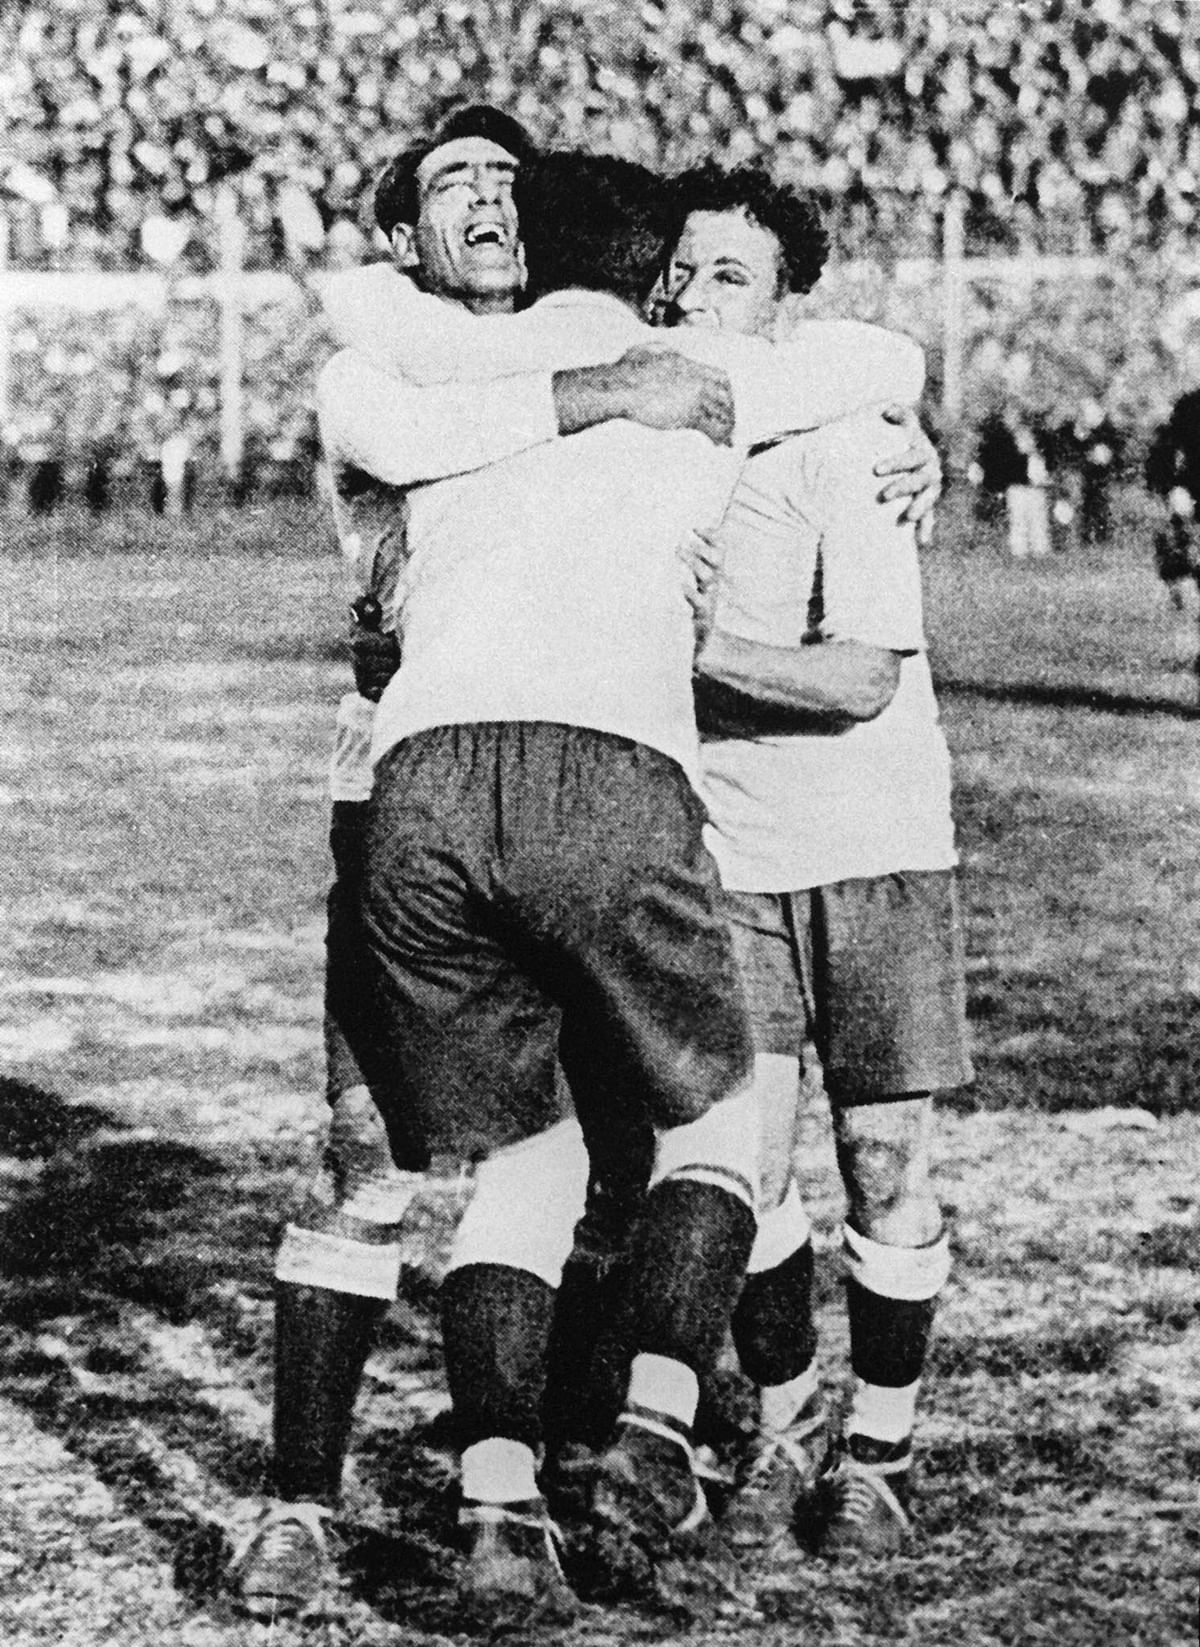 Uruguayans Pedro Cea, Hector Scarone and Hector Castro (from L) celebrate after Uruguay beat Argentina 4-2 in the first-ever World Cup soccer final in Montevideo 30 July 1930. Photo: AFP